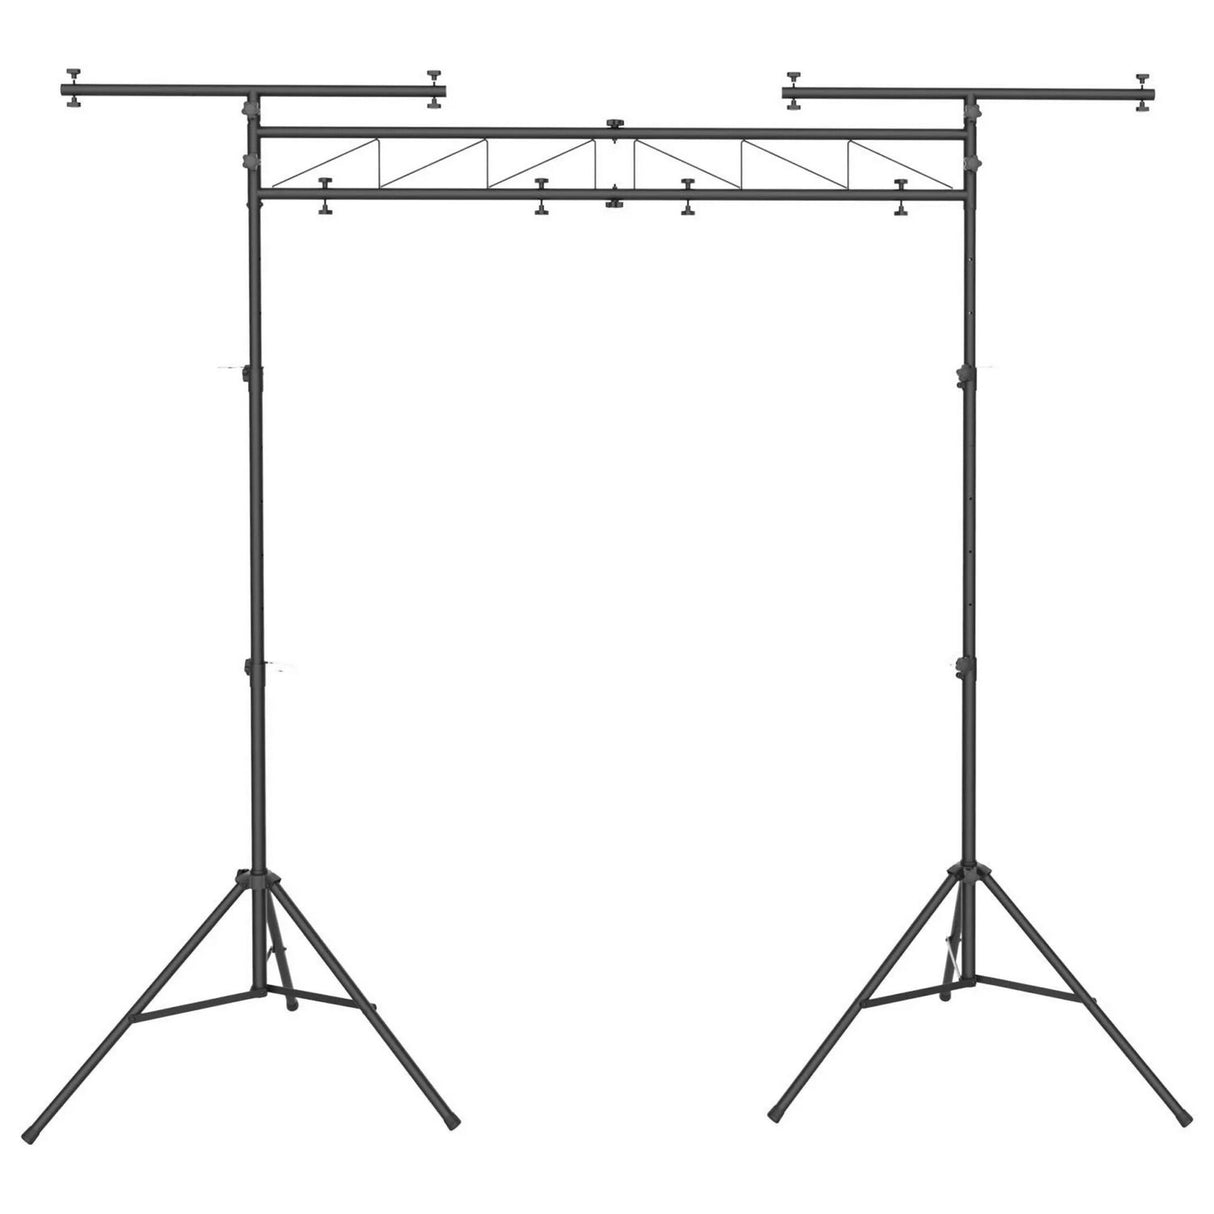 Odyssey LTMTS90 90-Inch Wide Mobile DJ Tool-less Lighting Truss System